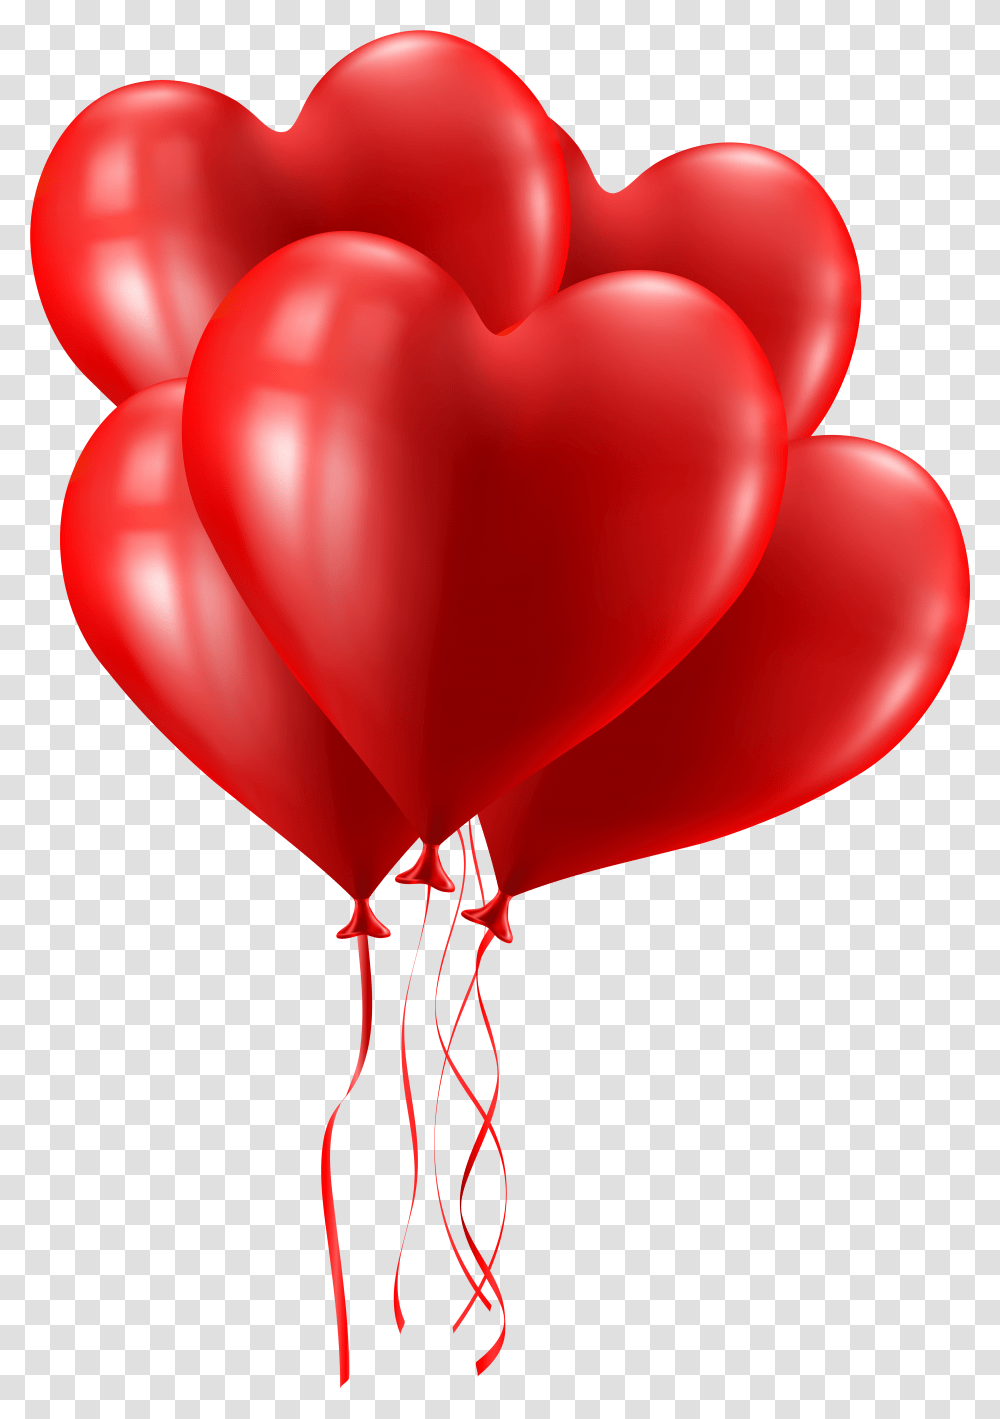 Valentine's Day Heart Balloon Hd Download Pink Heart Balloons Transparent Png